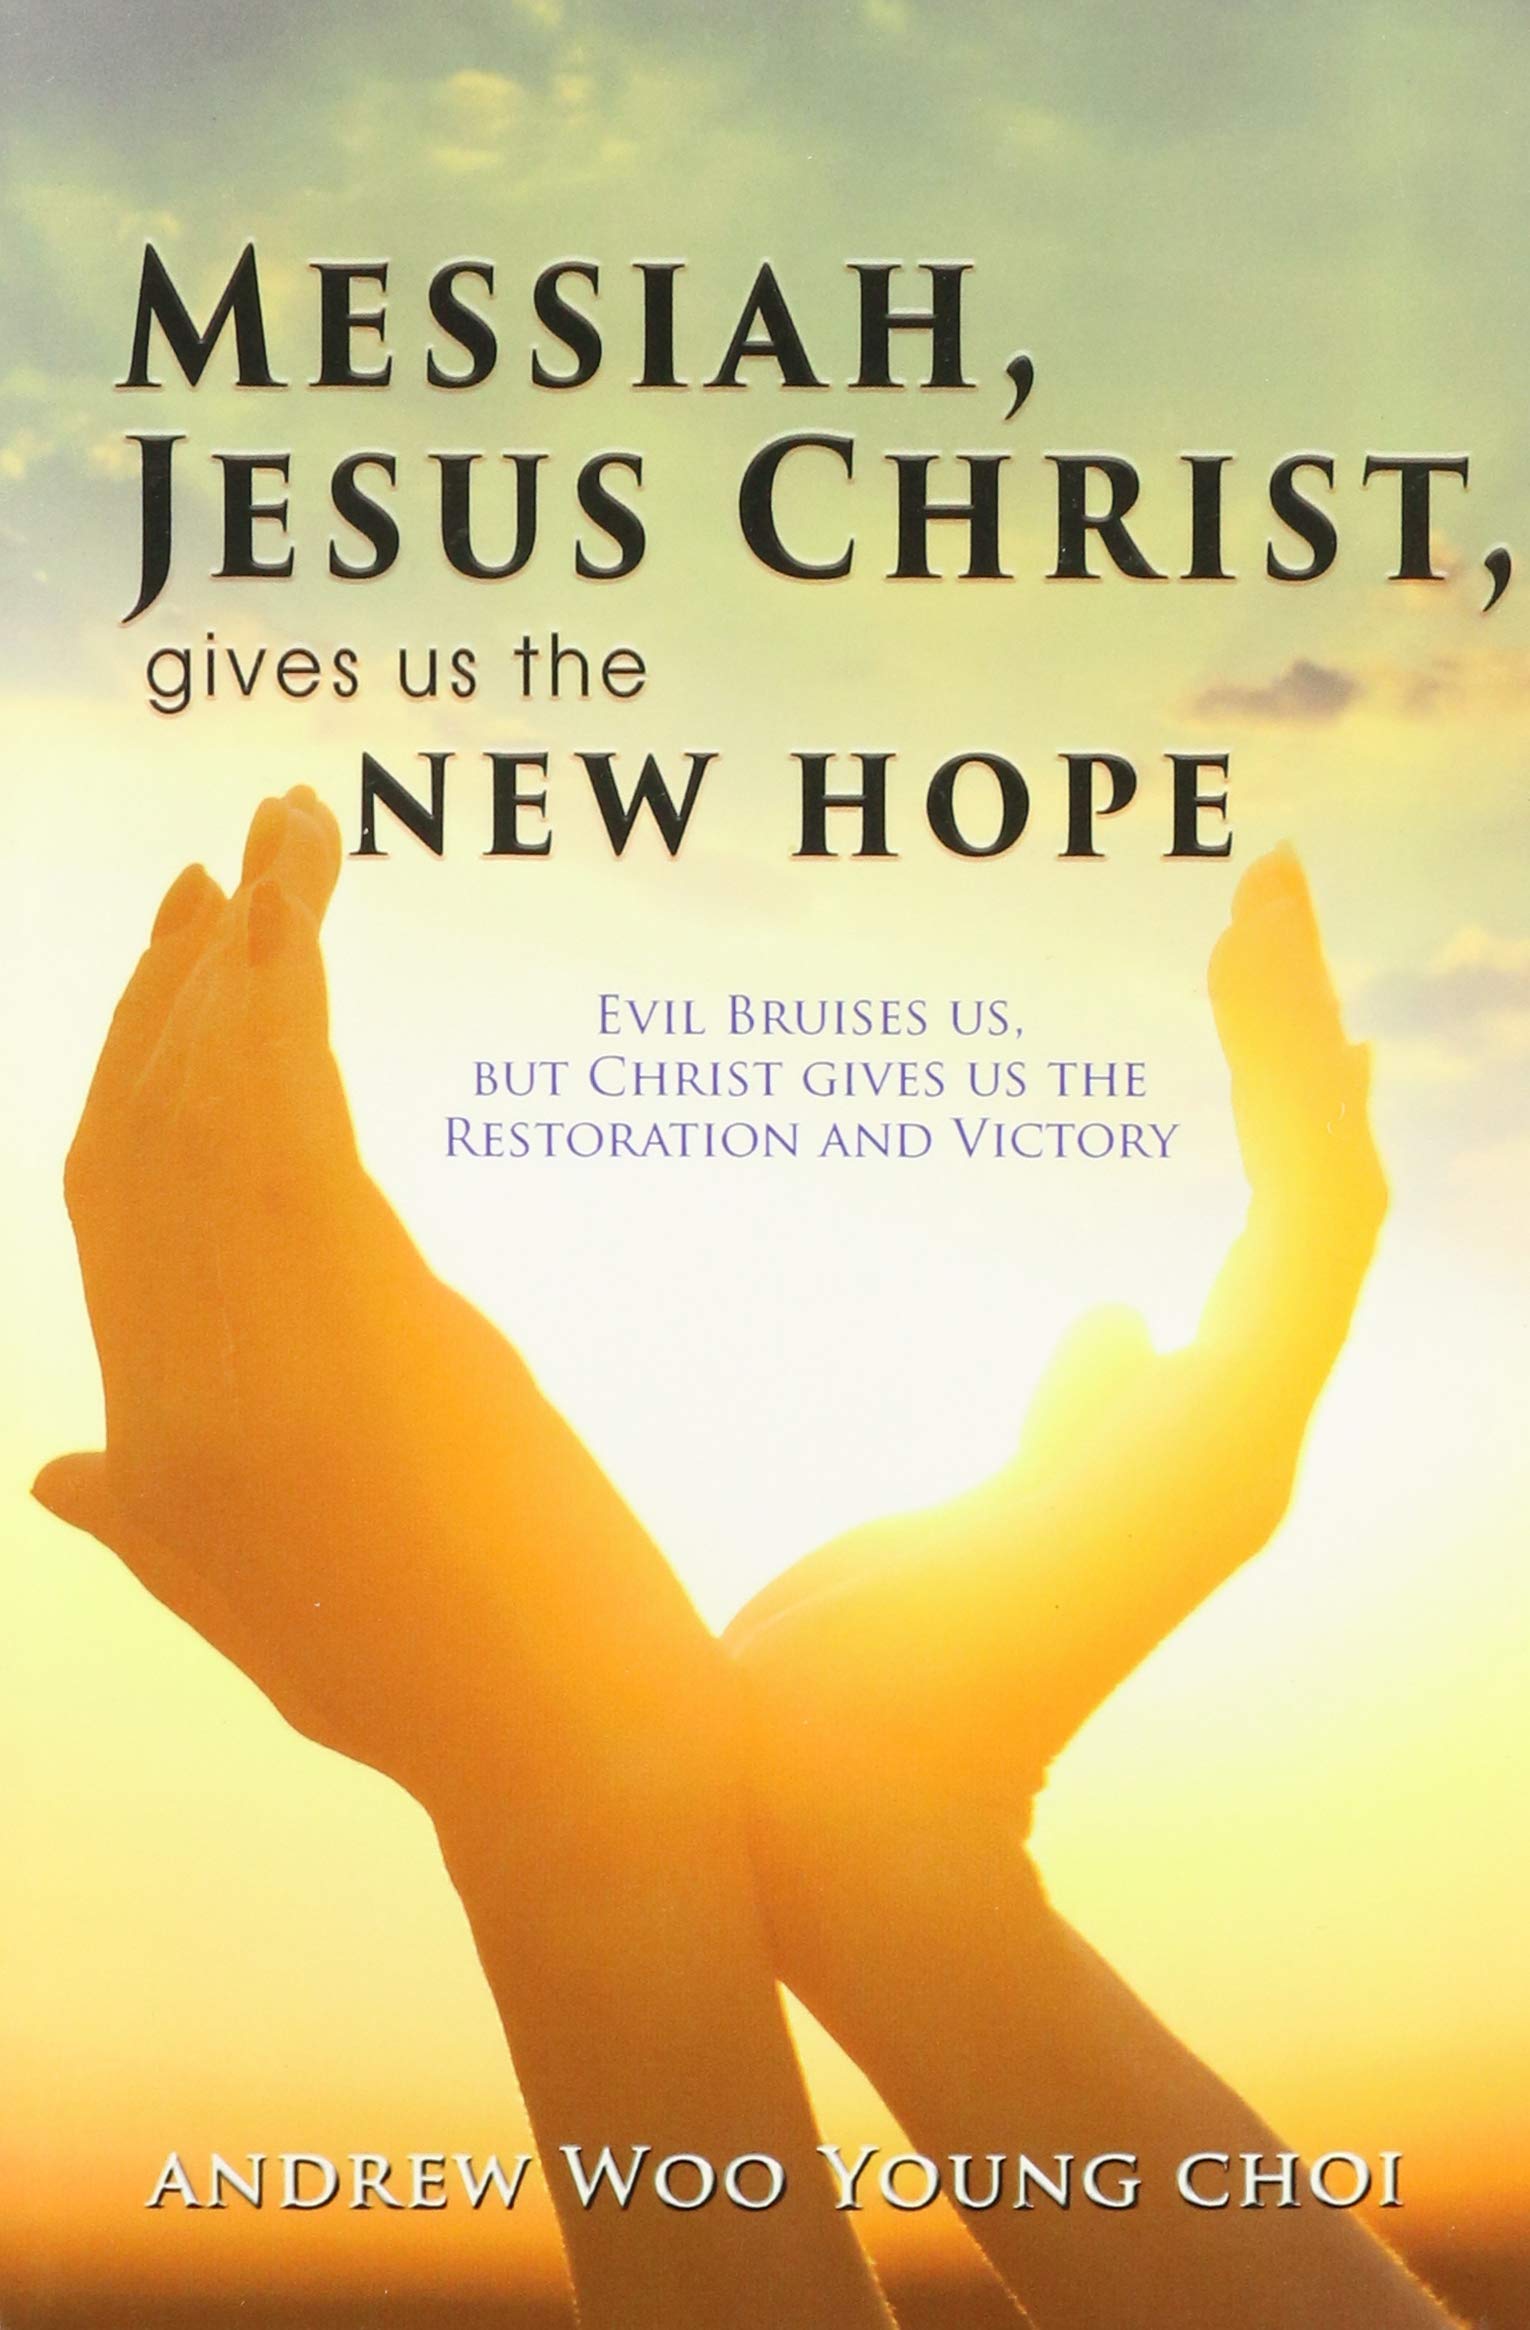 Author's Tranquility Press is thrilled to announce the release of "Messiah, Jesus Christ, Gives Us the New Hope"